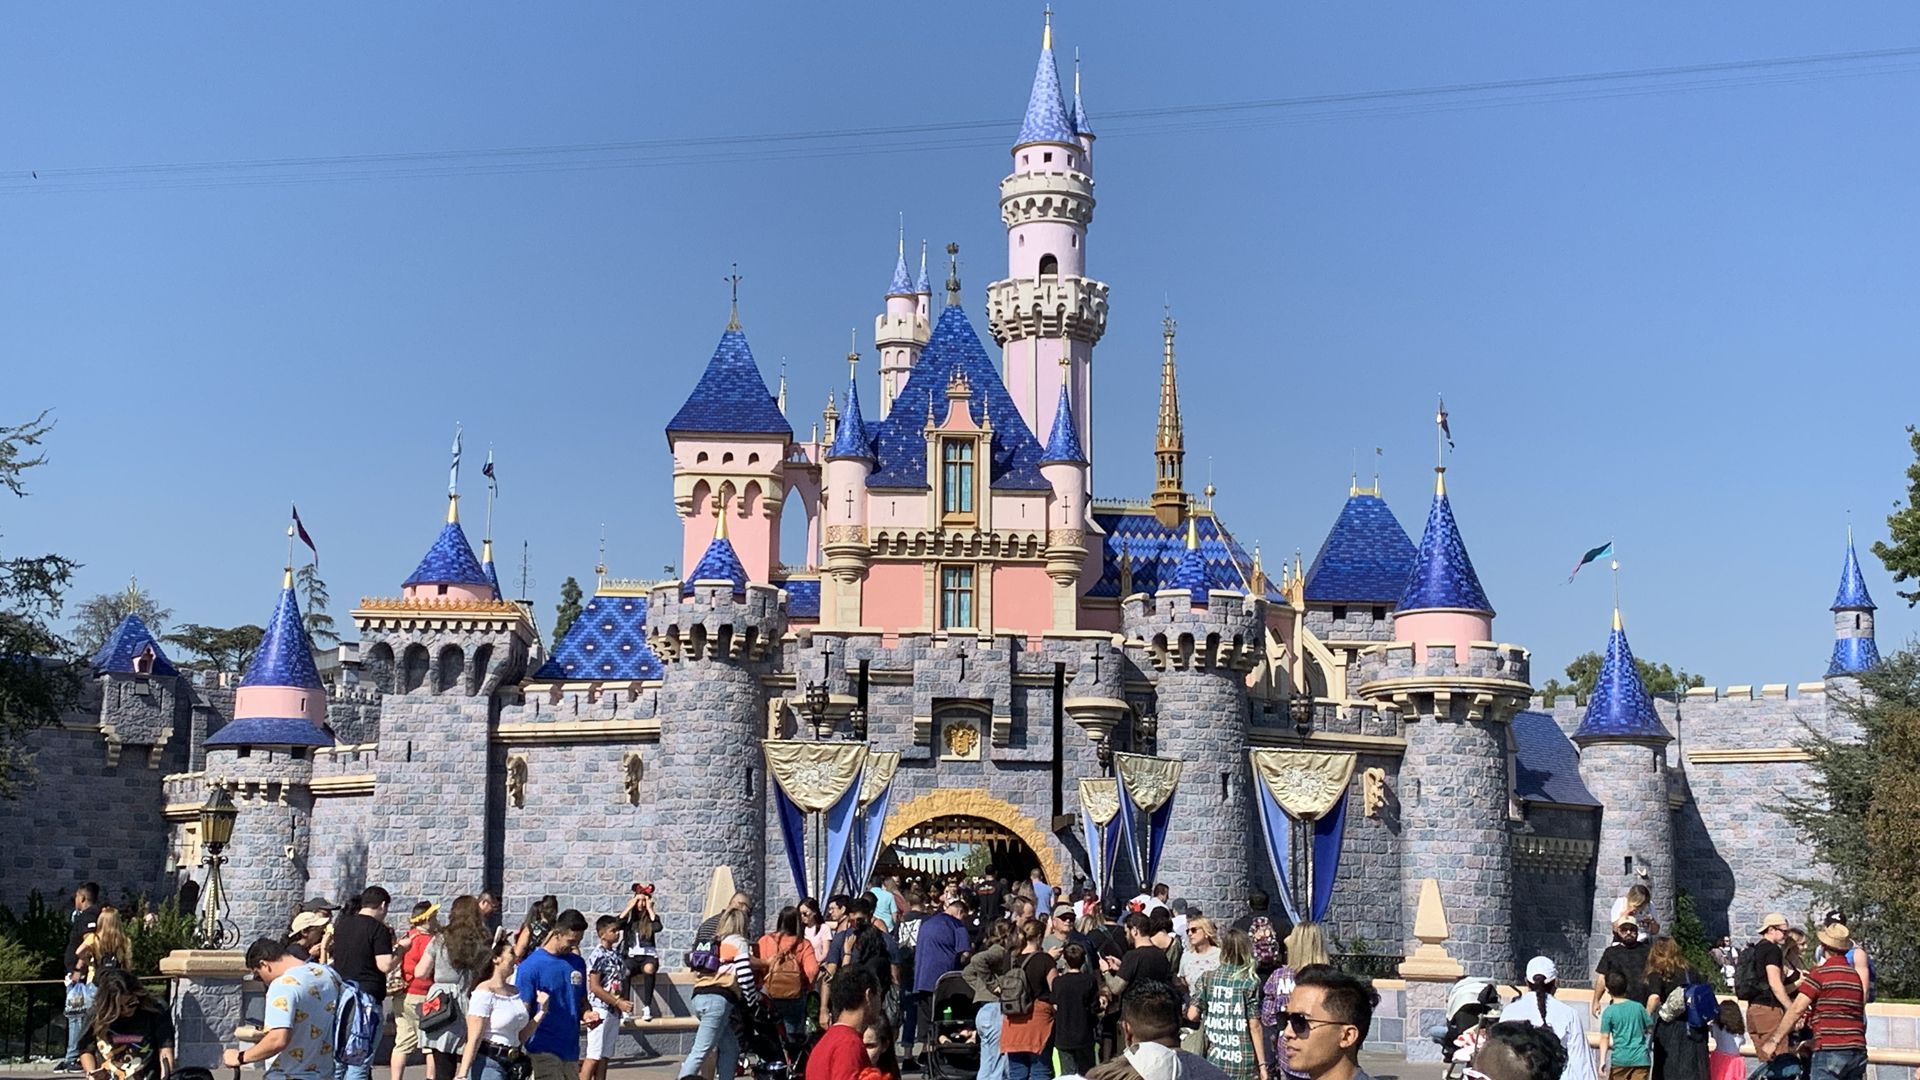 Disneyland theme parks set to reopen, with restrictions, on April 30